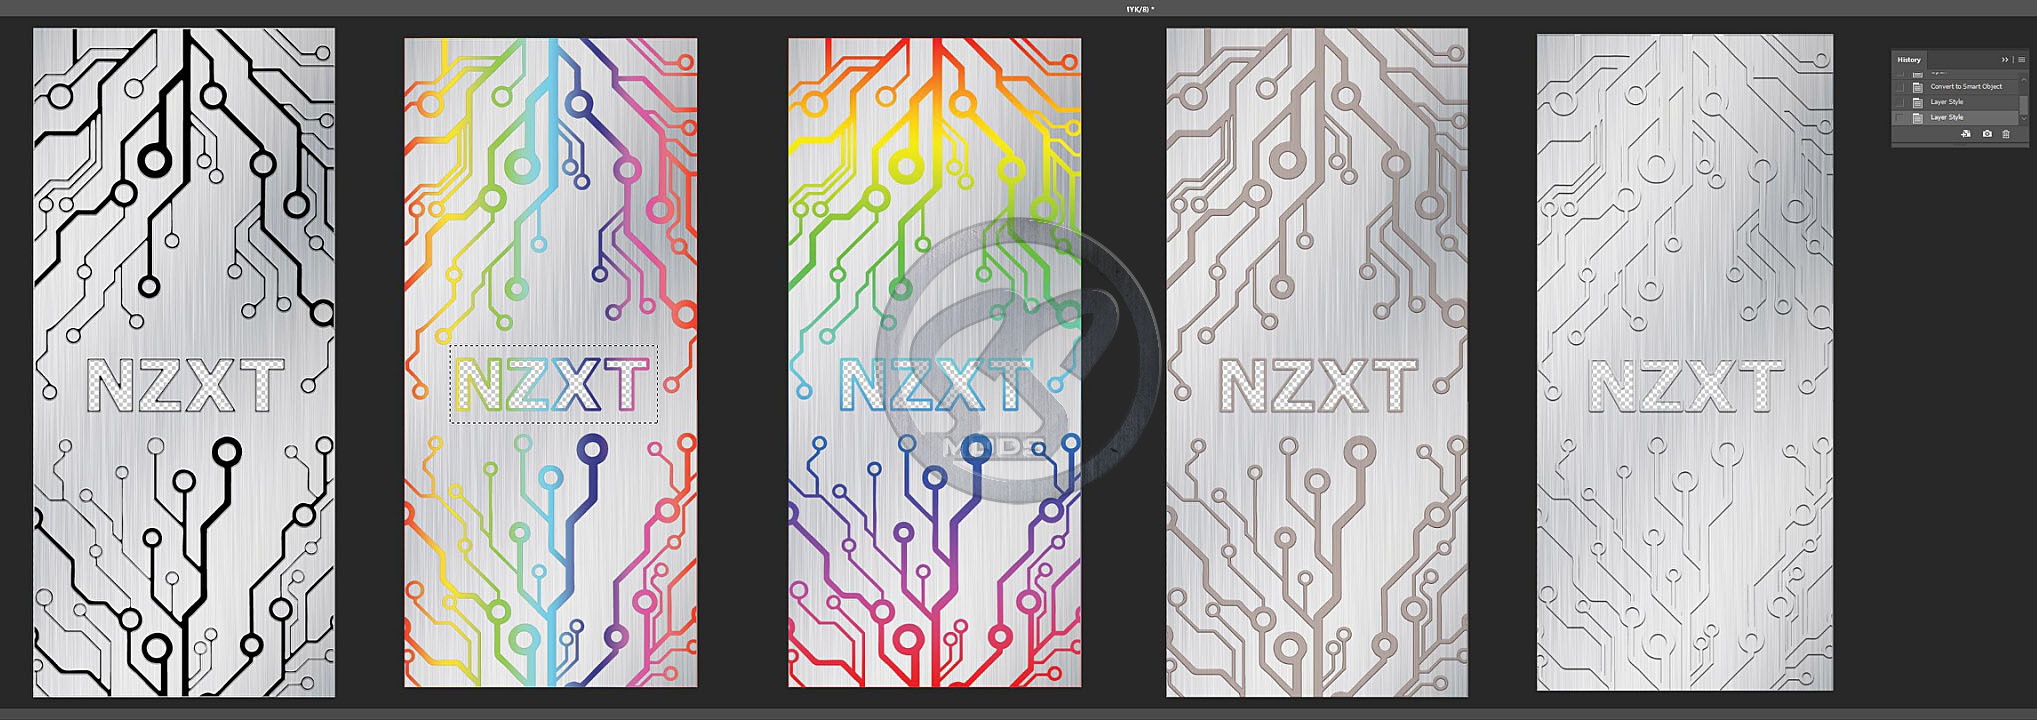 NZXT-by-SS-76